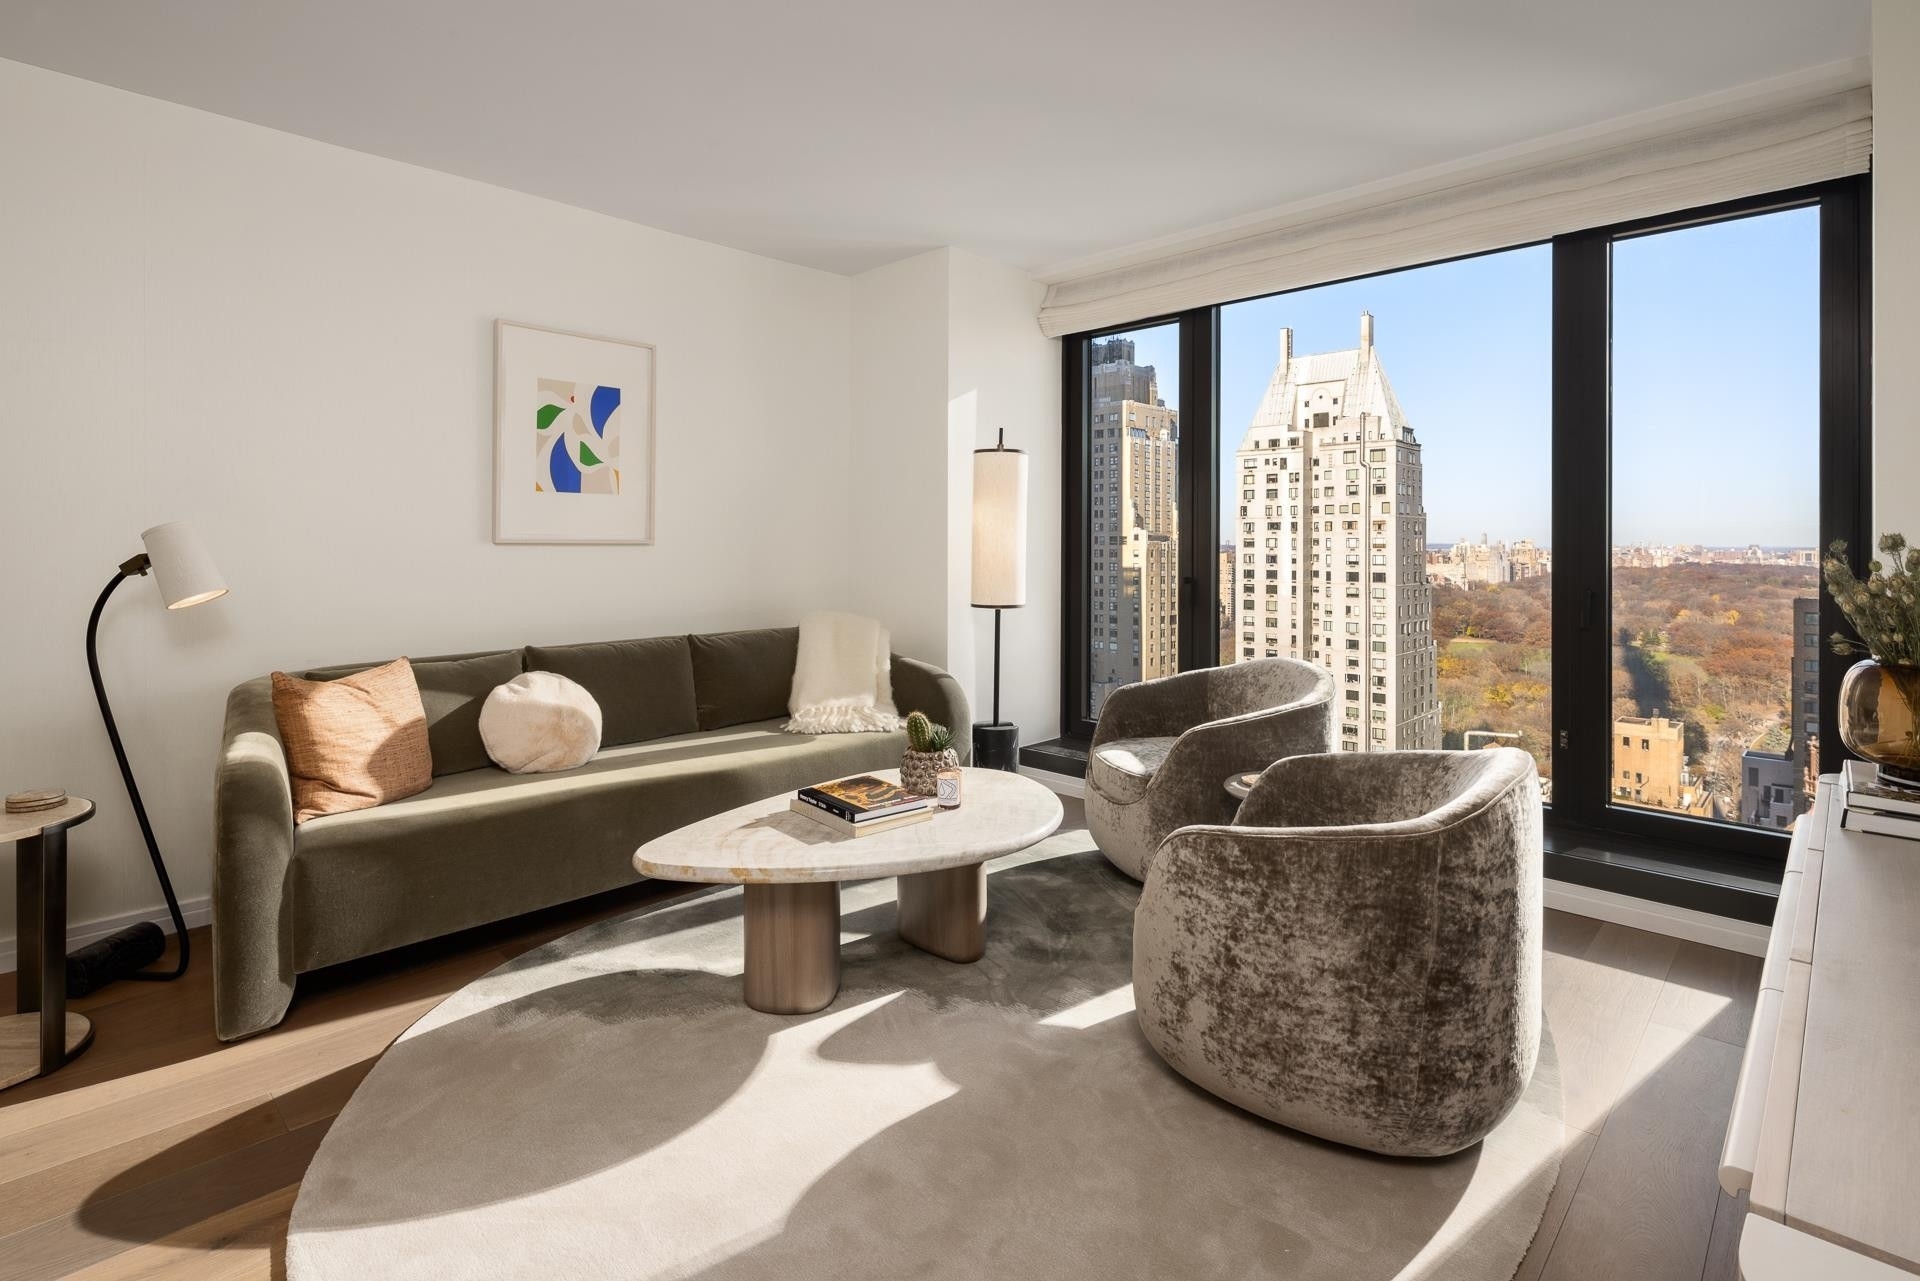 Condominium for Sale at One11, 111 W 56TH ST, 40B Midtown West, New York, New York 10019